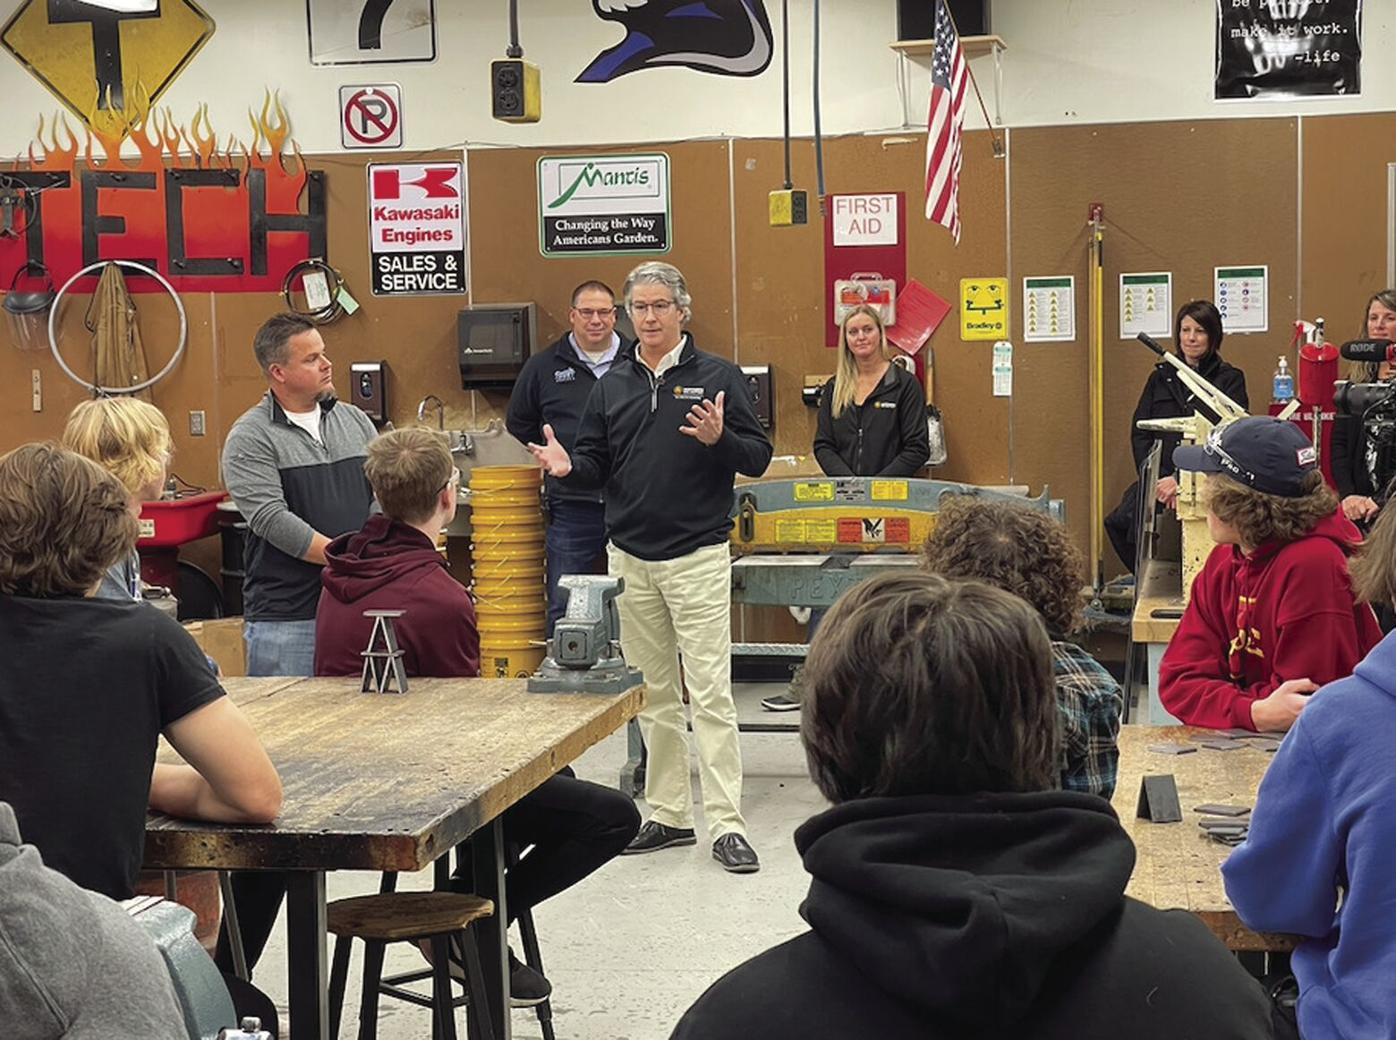 Northern Tool donates $5,000 of equipment to Rogers High School